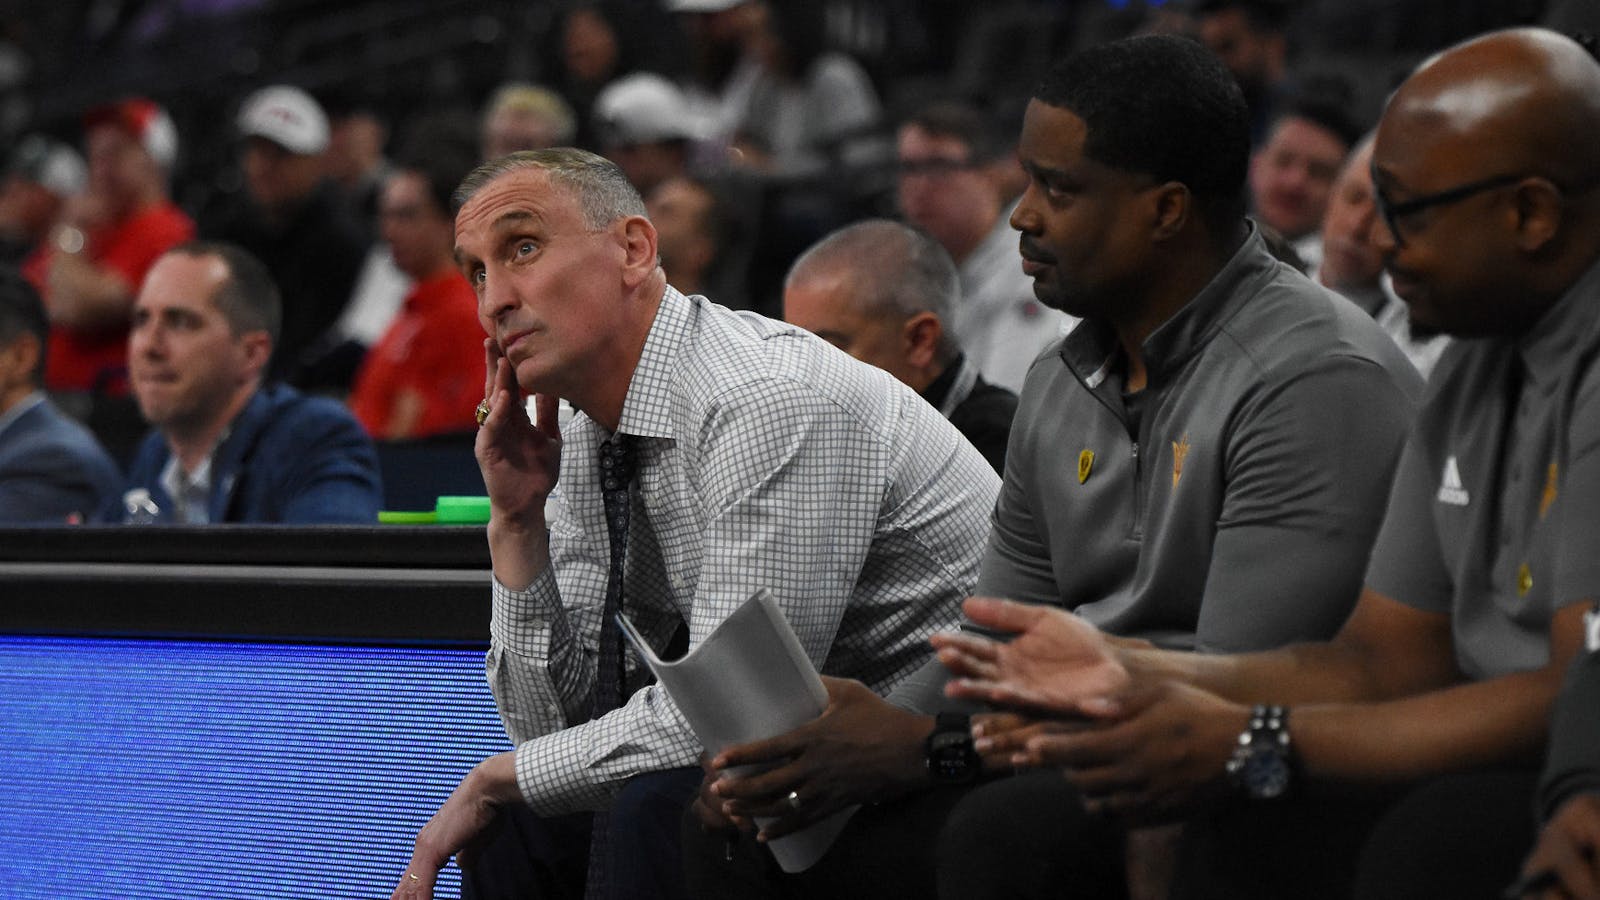 ASU men's basketball is once again facing massive turnover this offseason